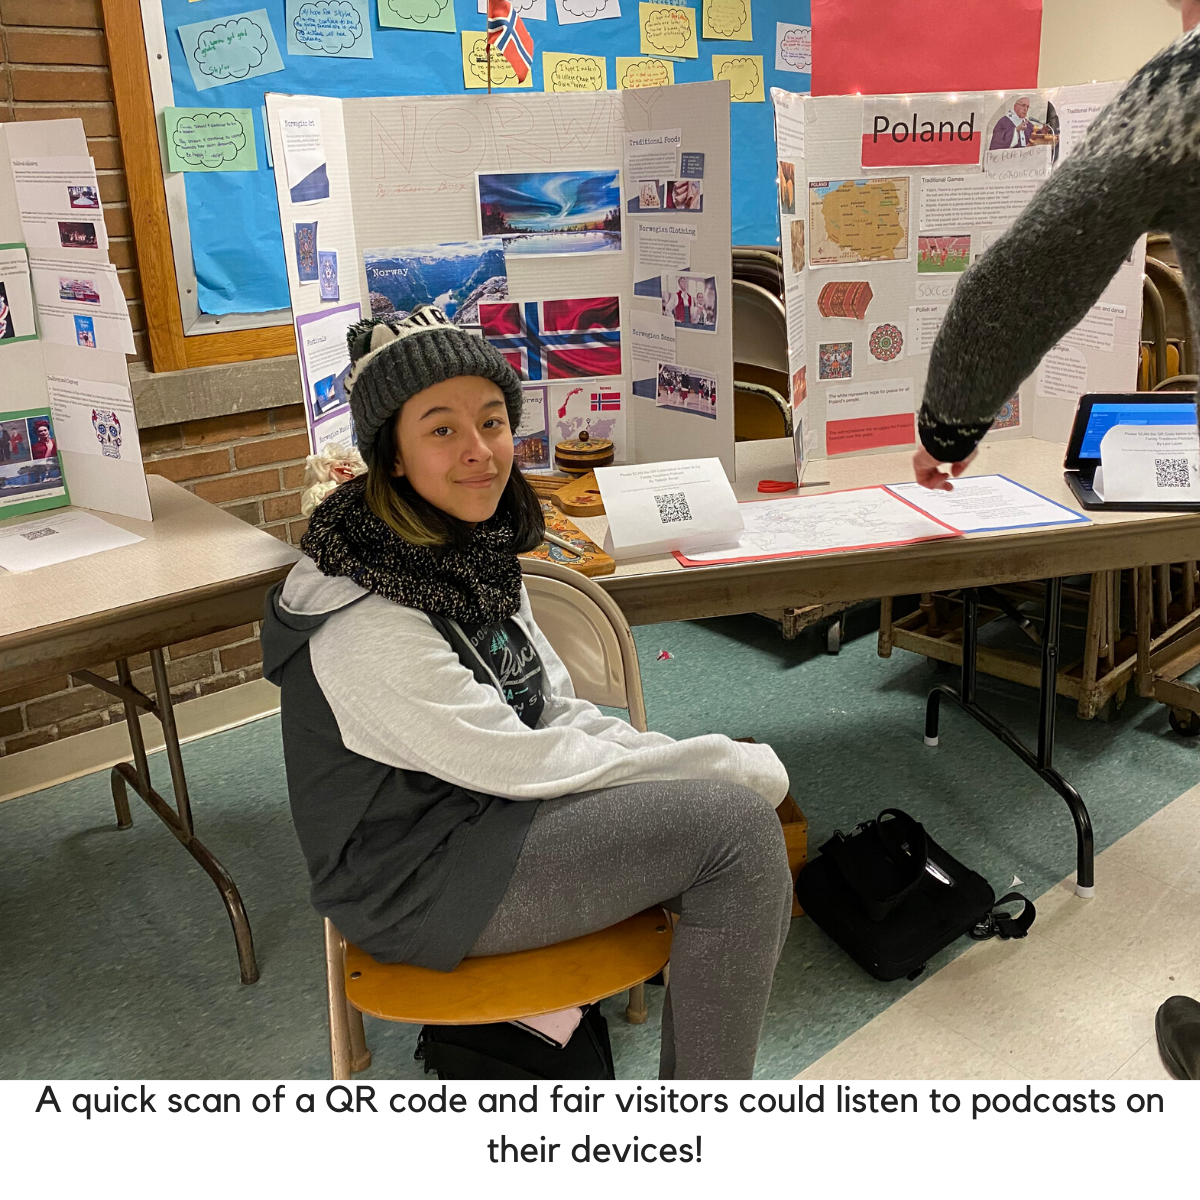 Student shows QR code for podcast listening